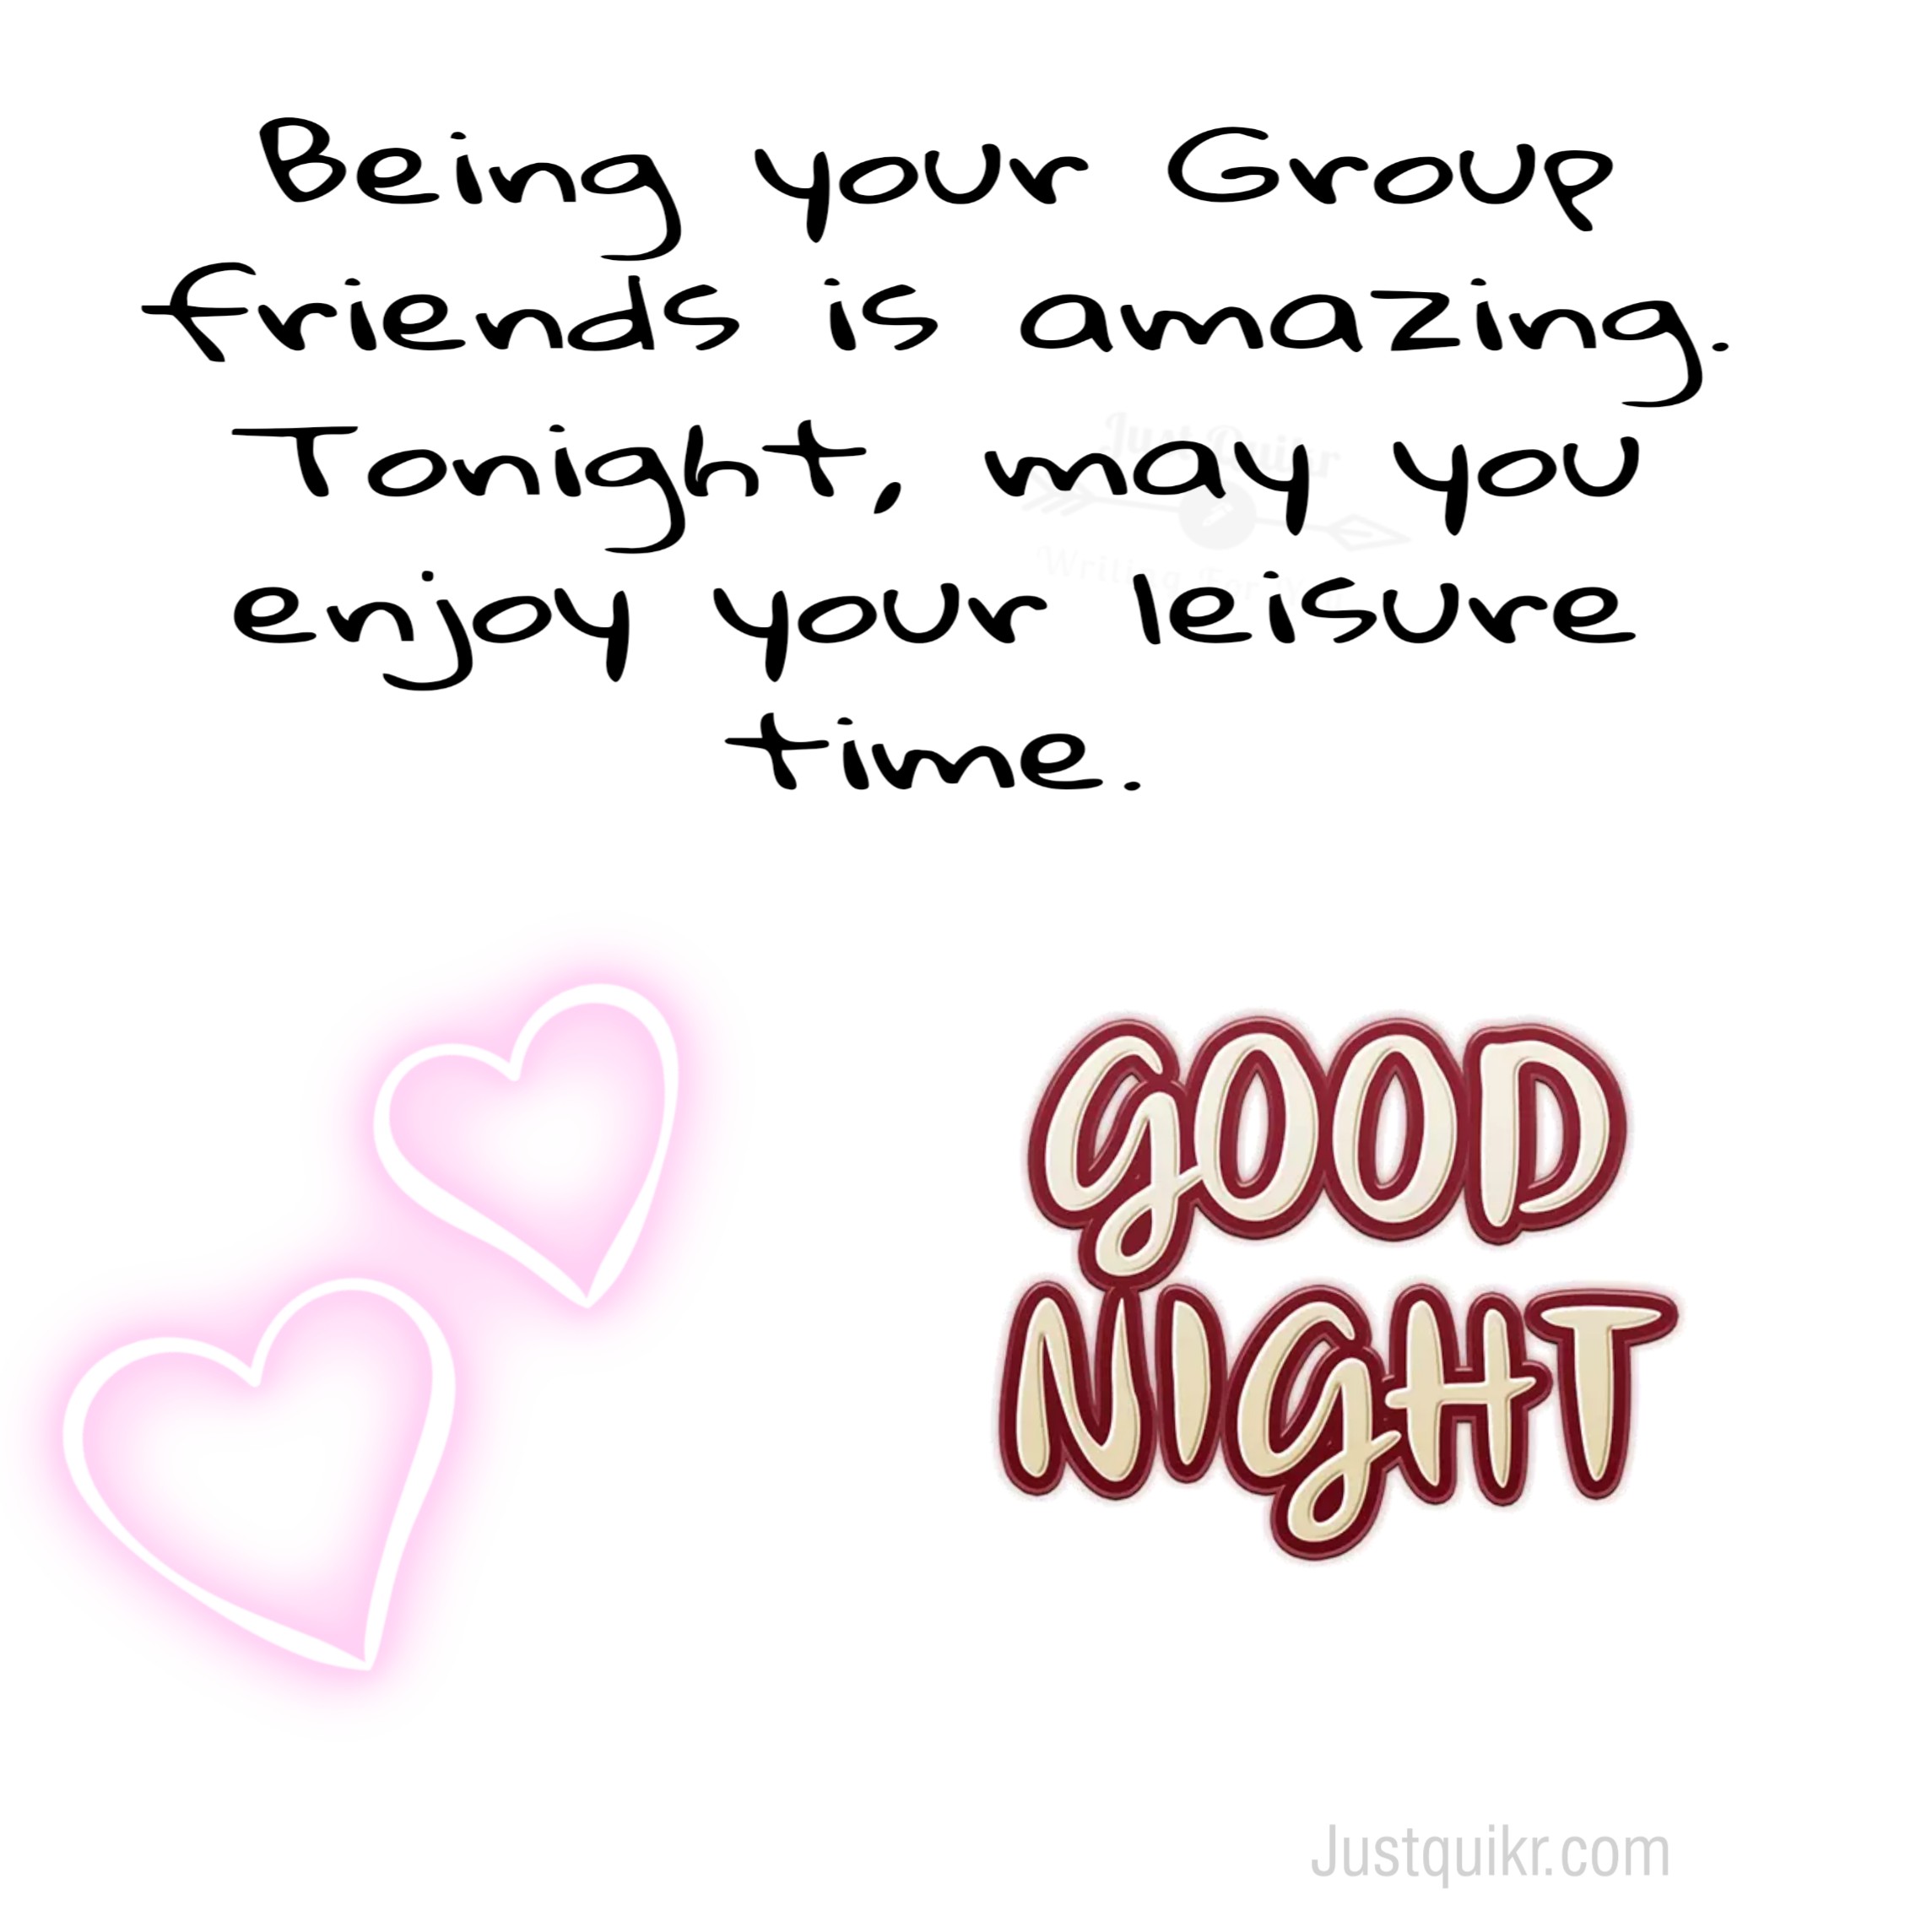 Good Night HD Pics Images For Group Friends 